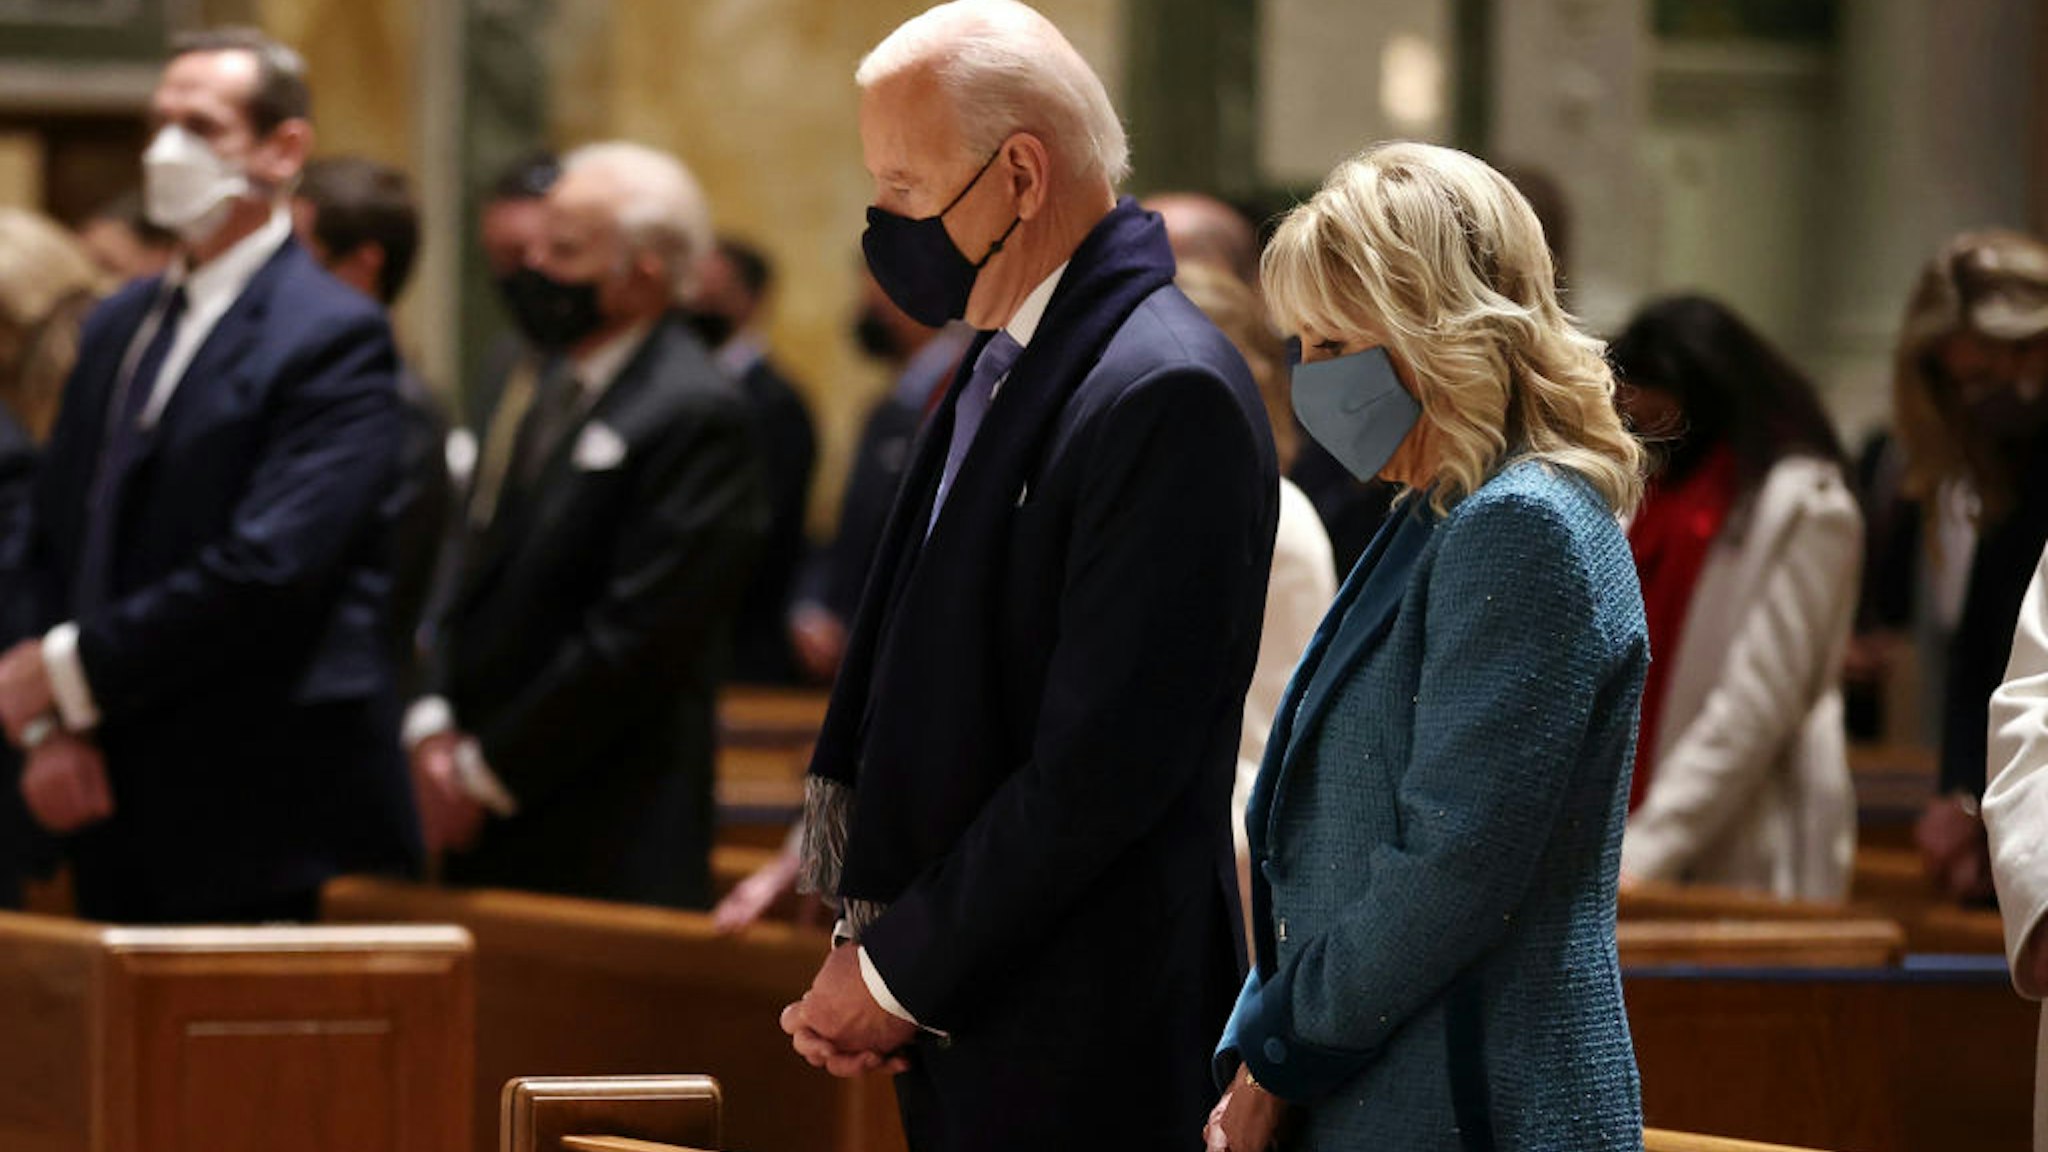 WASHINGTON, DC - JANUARY 20: U.S. President-elect Joe Biden and Dr. Jill Biden attend services at the Cathedral of St. Matthew the Apostle with Congressional leaders prior the 59th Presidential Inauguration ceremony on January 20, 2021 in Washington, DC. During today's inauguration ceremony Joe Biden becomes the 46th president of the United States. (Photo by Chip Somodevilla/Getty Images)